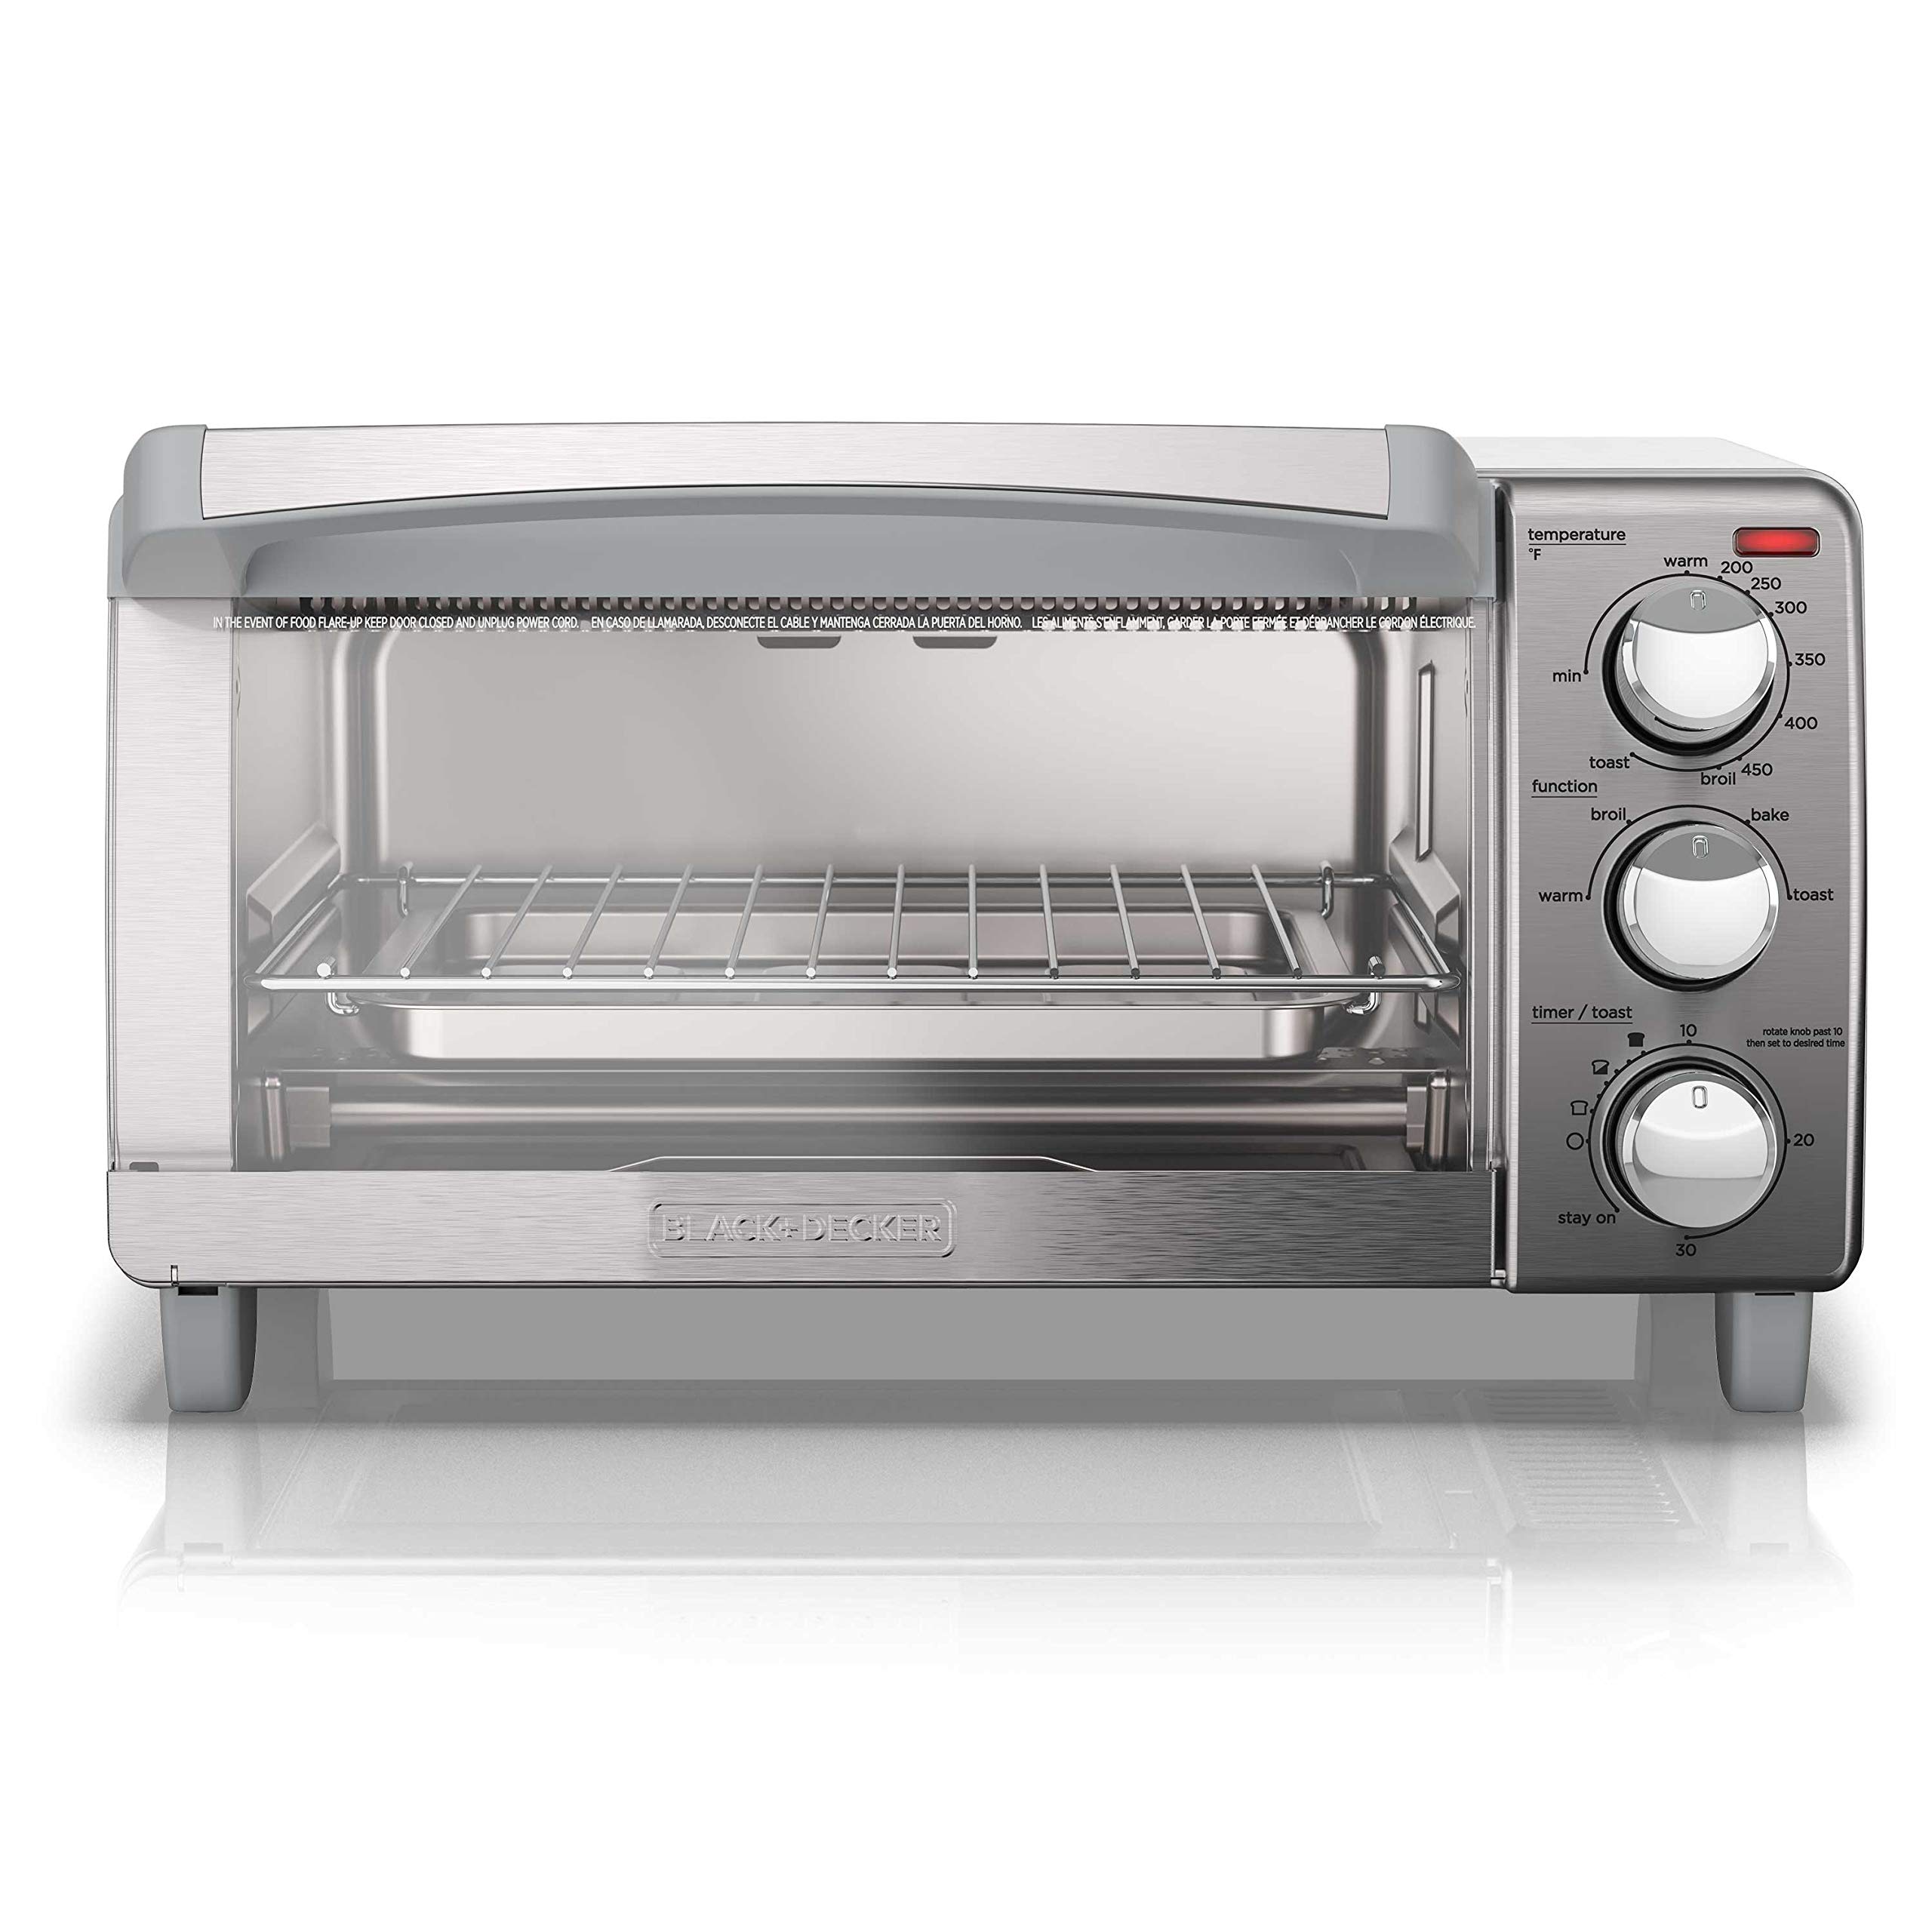 BLACK+DECKER 4-Slice Toaster Oven with Natural Convection, Bake, Broil, Toast, Keep Warm